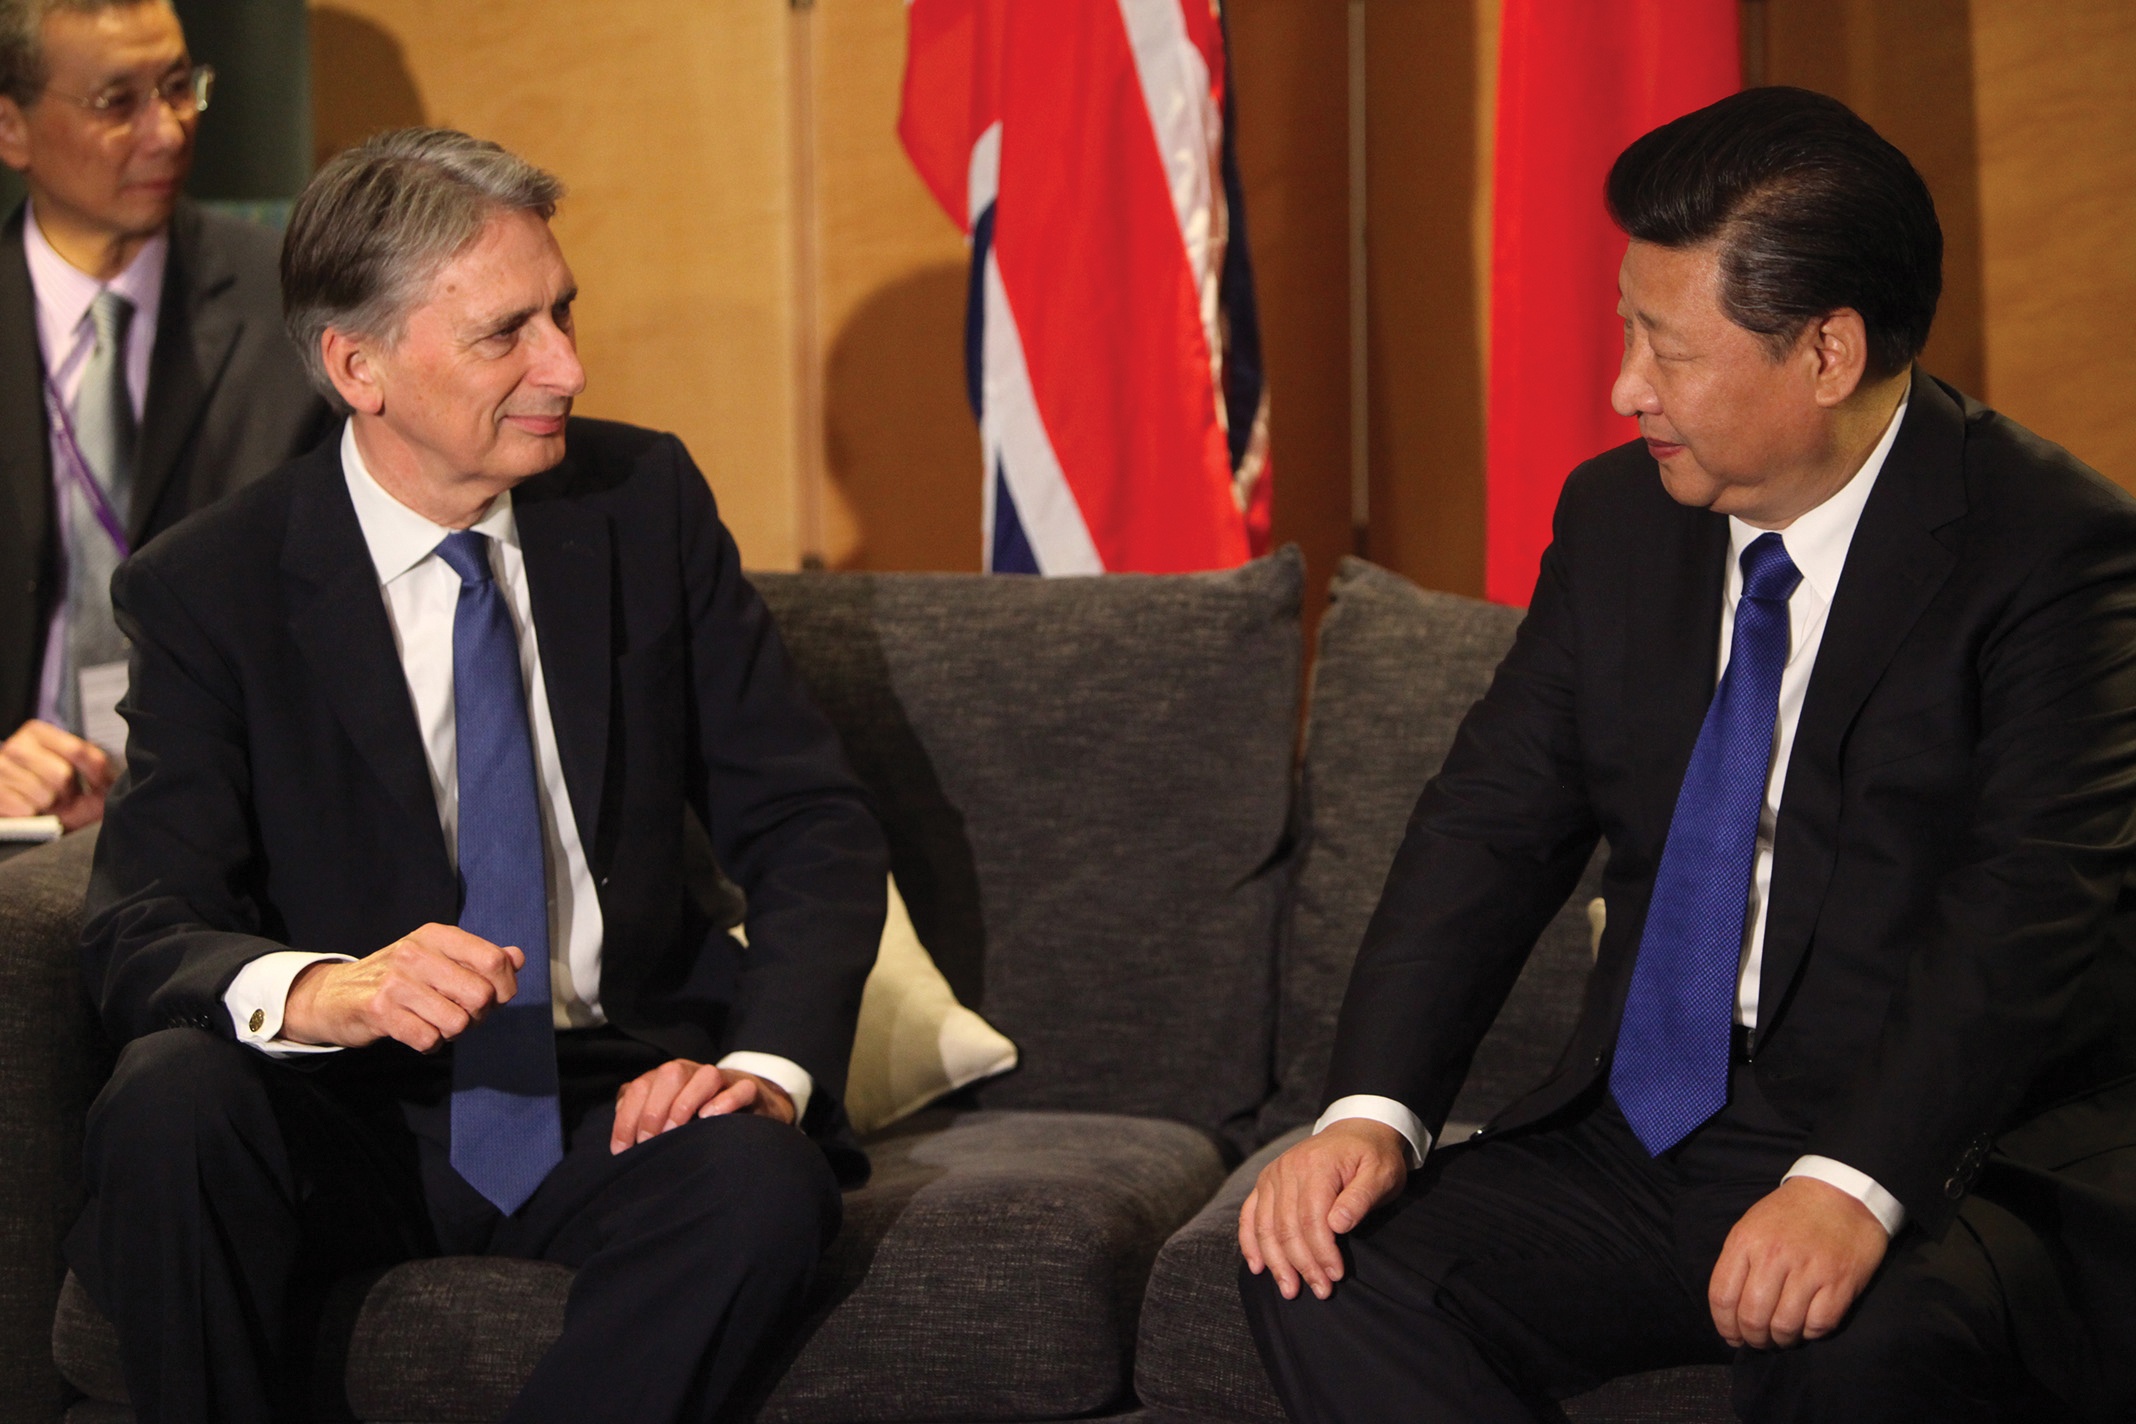 Strictly business: Foreign Secretary Philip Hammond in cordial conversation with the Chinese President; human rights were not on the official agenda